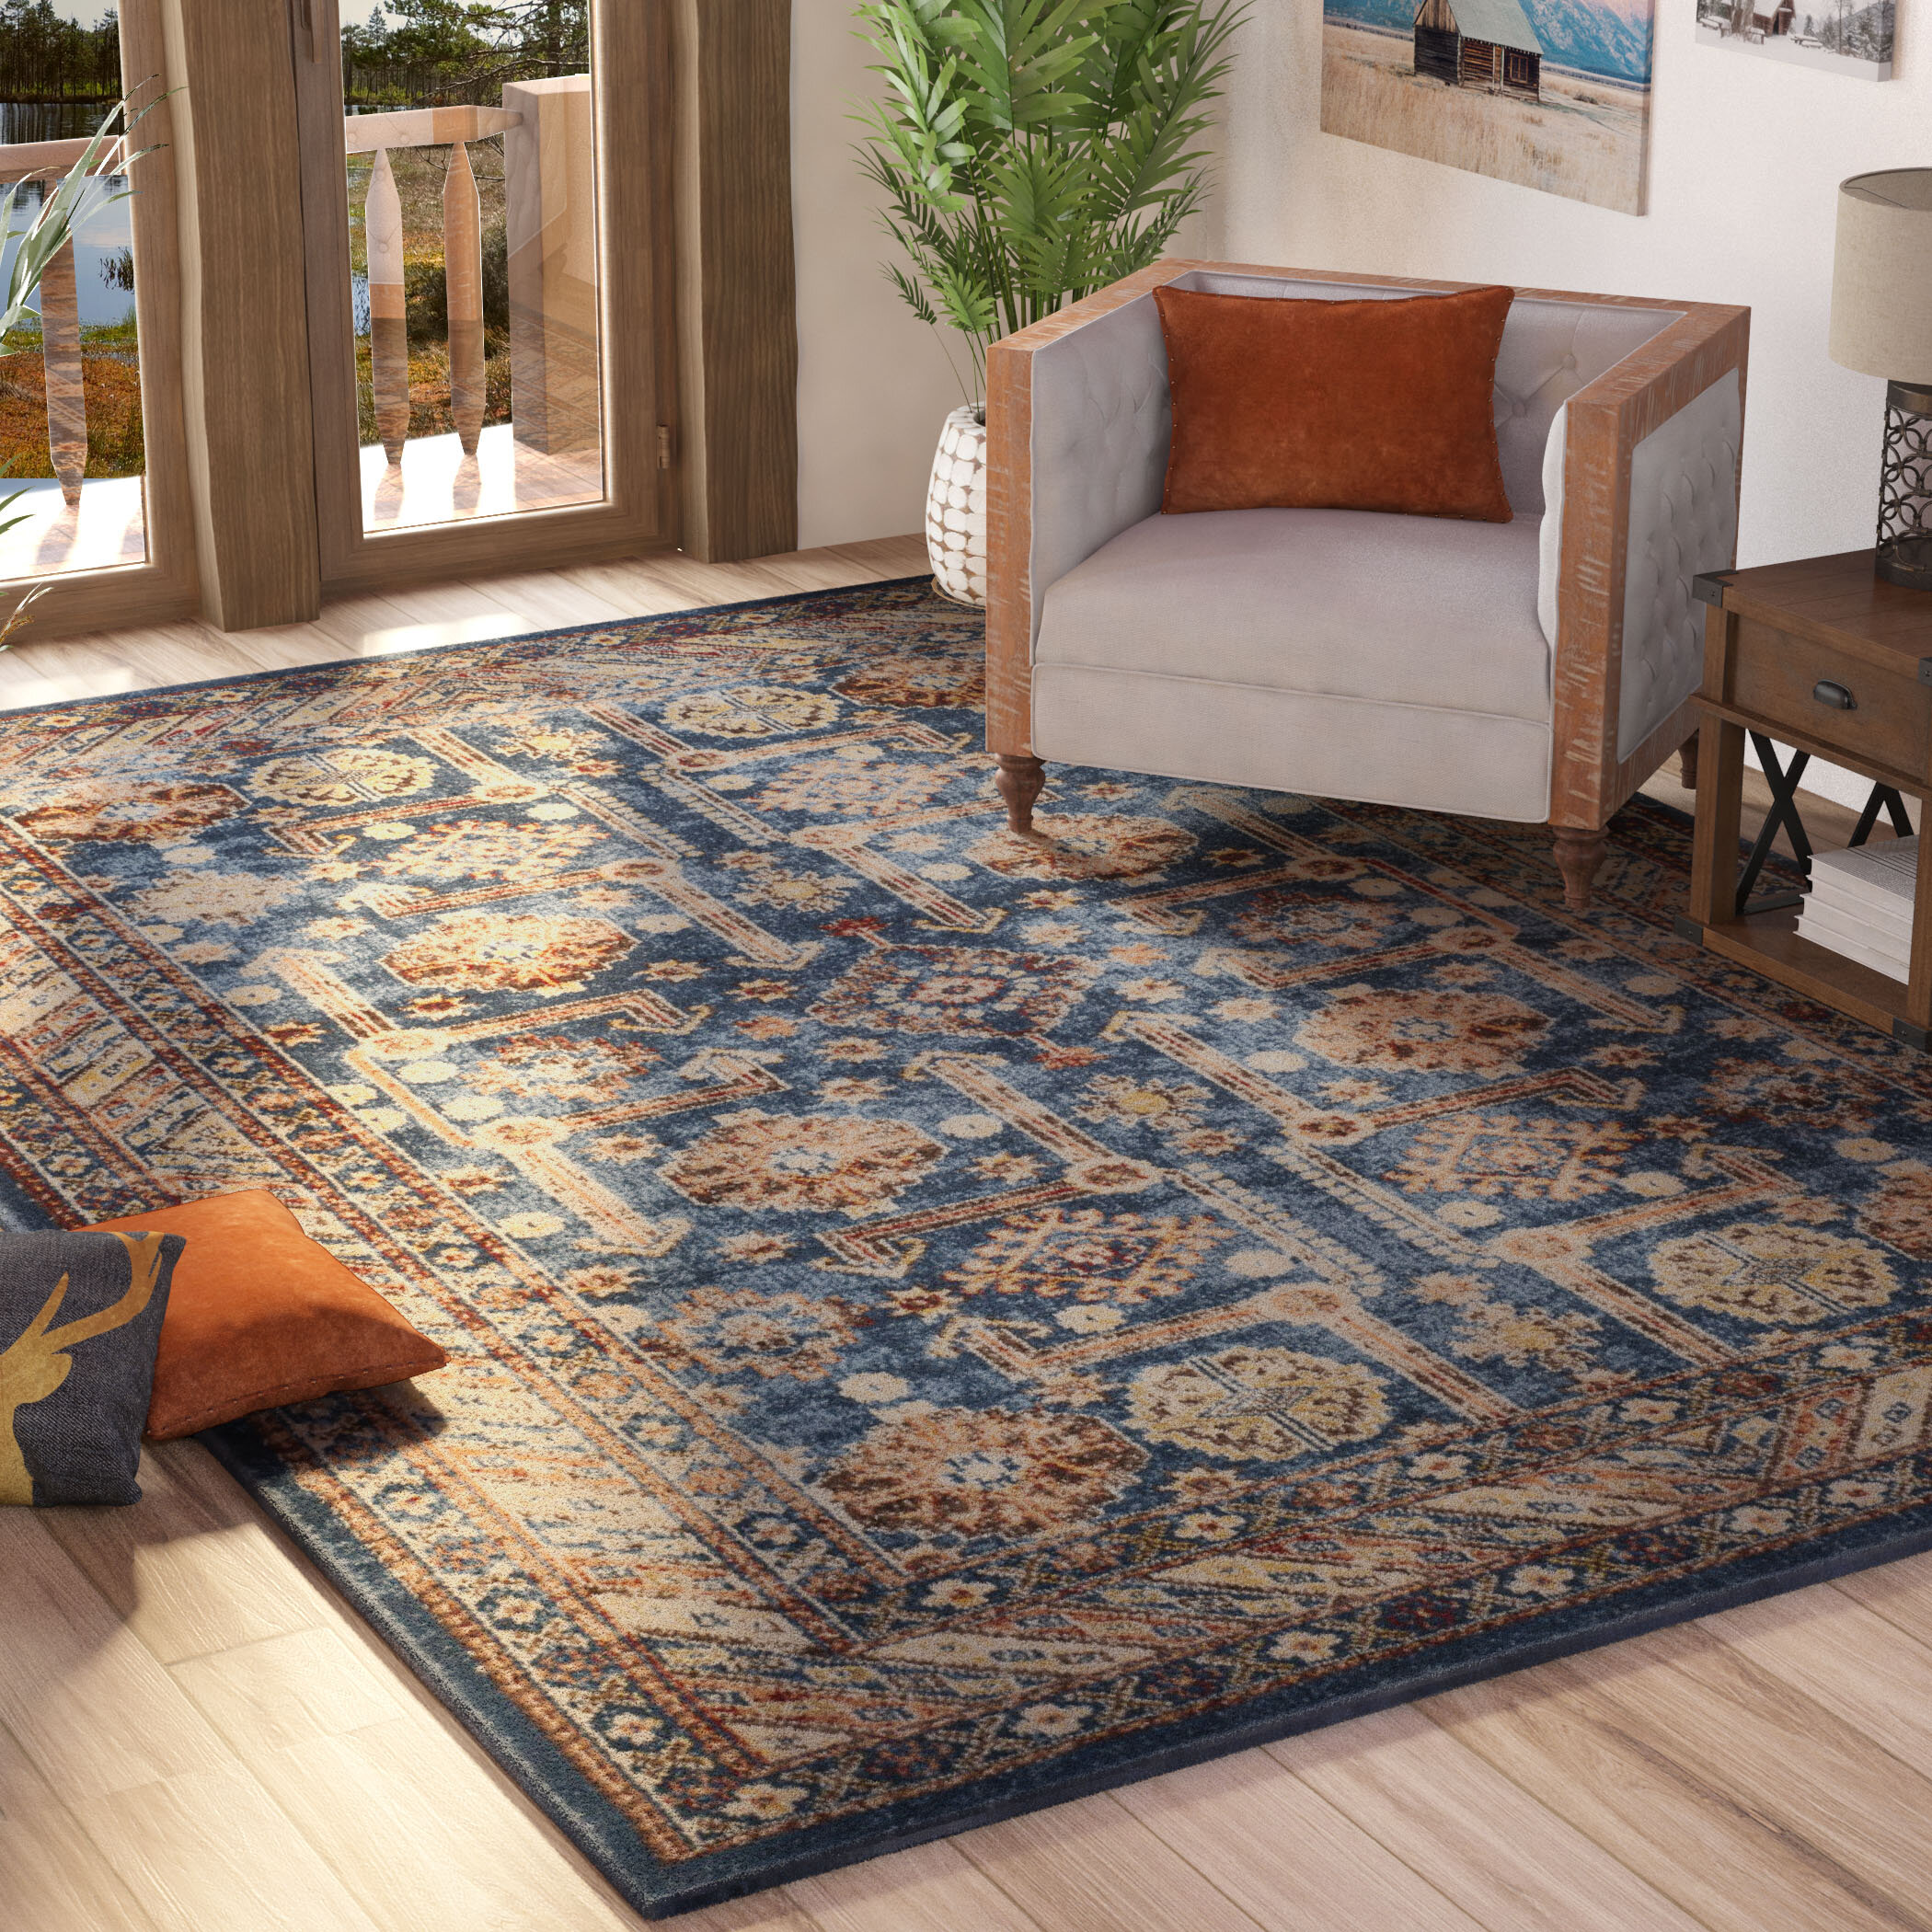 Anchor your ensemble with rustic charm when you roll out this lovely rug. 